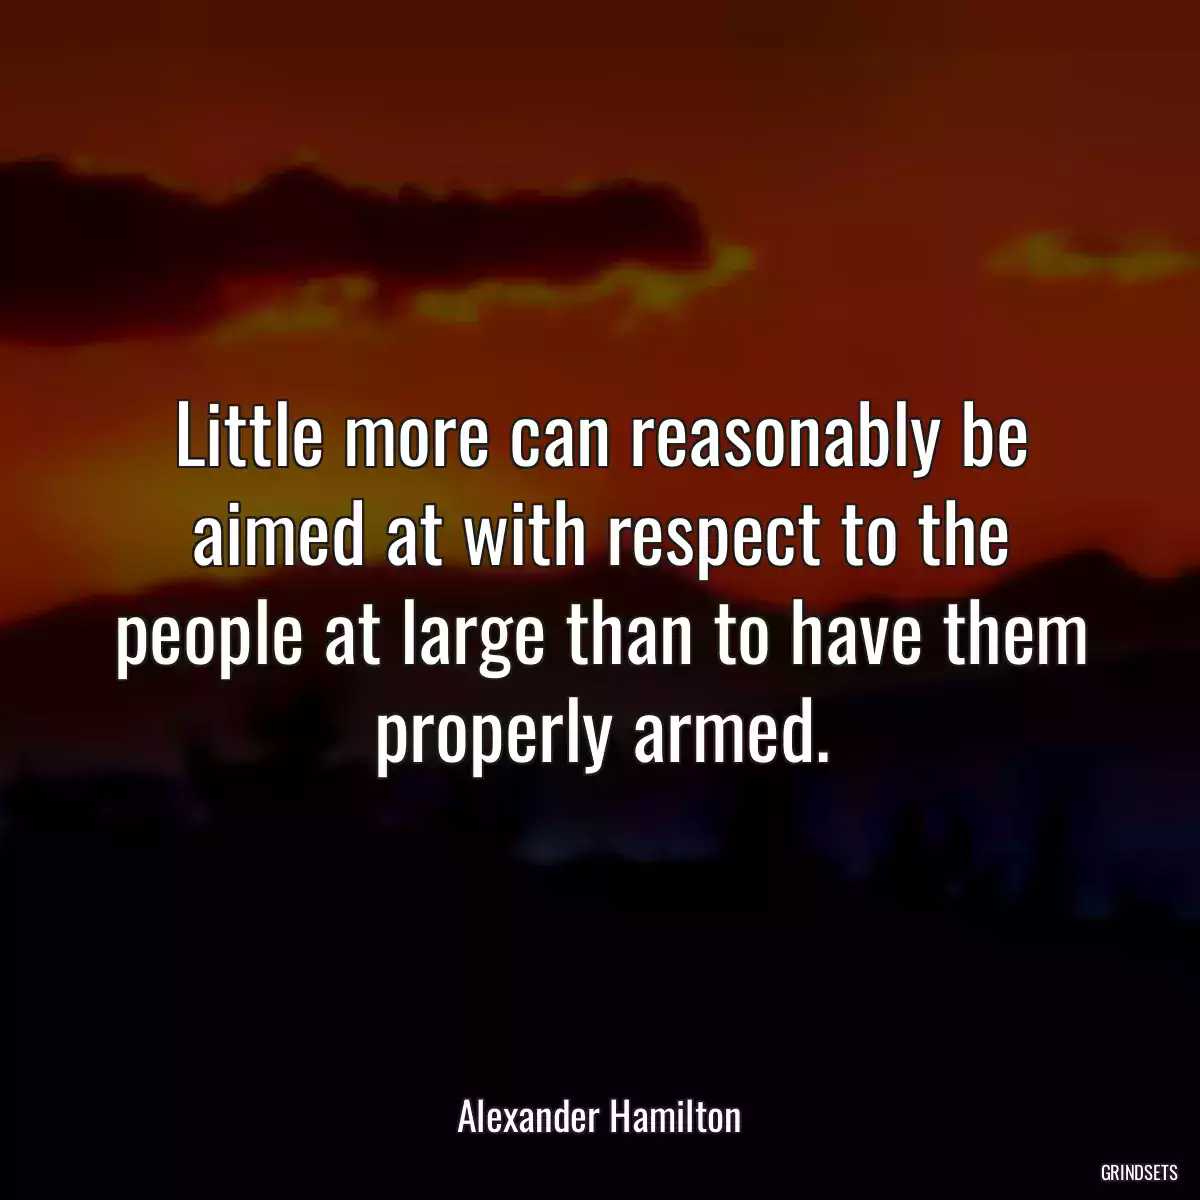 Little more can reasonably be aimed at with respect to the people at large than to have them properly armed.